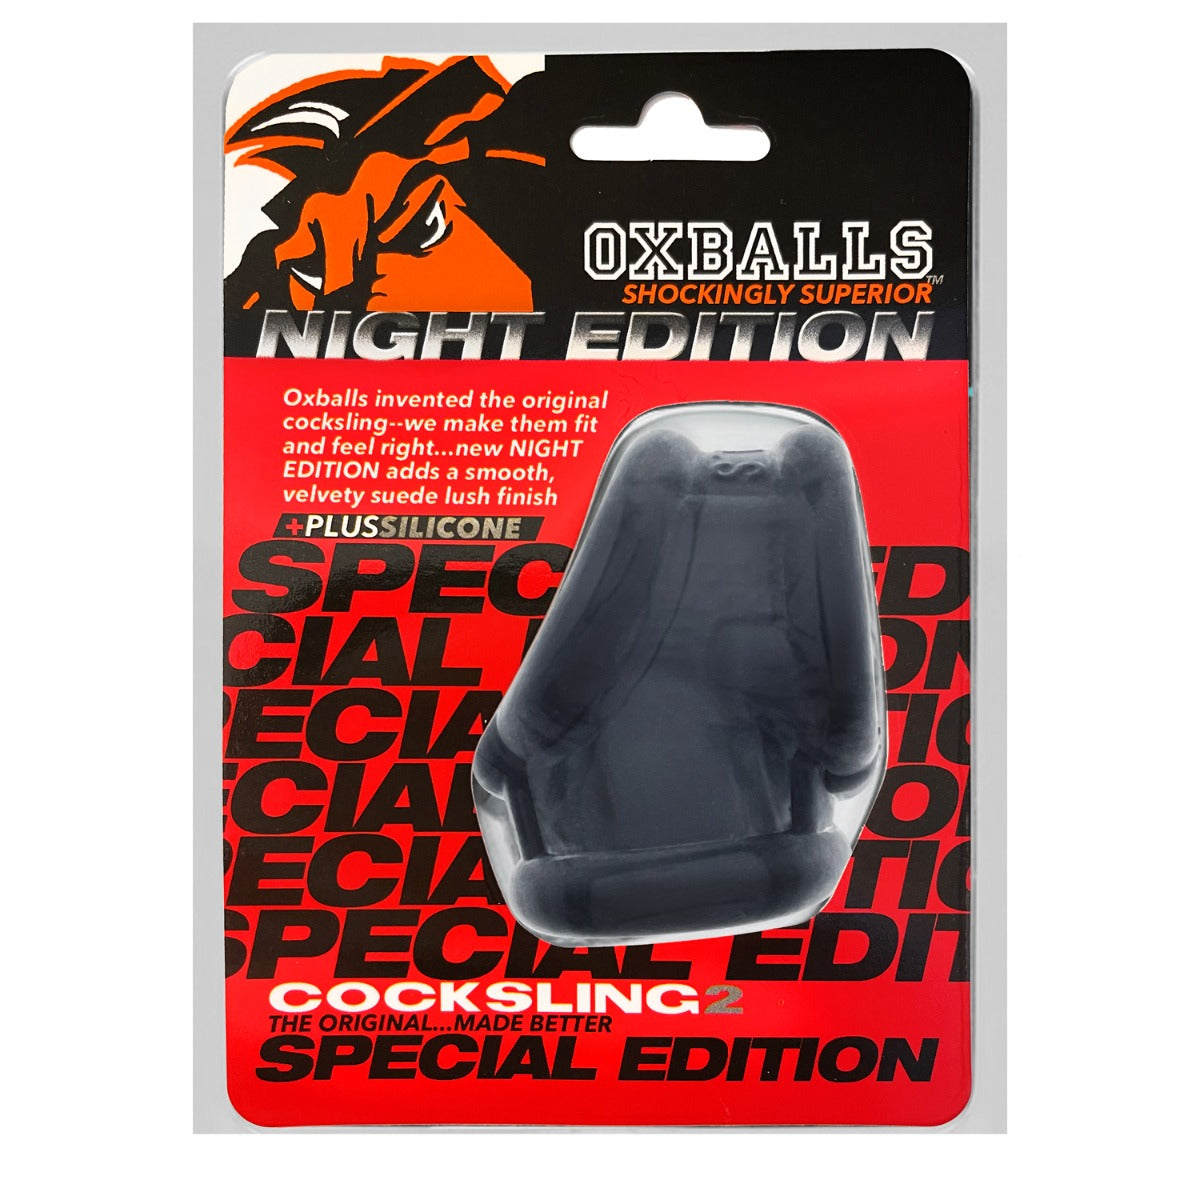 Oxballs Cocksling 2 Cock Ring Ball Stretcher Special Edition Night (8251307262191)